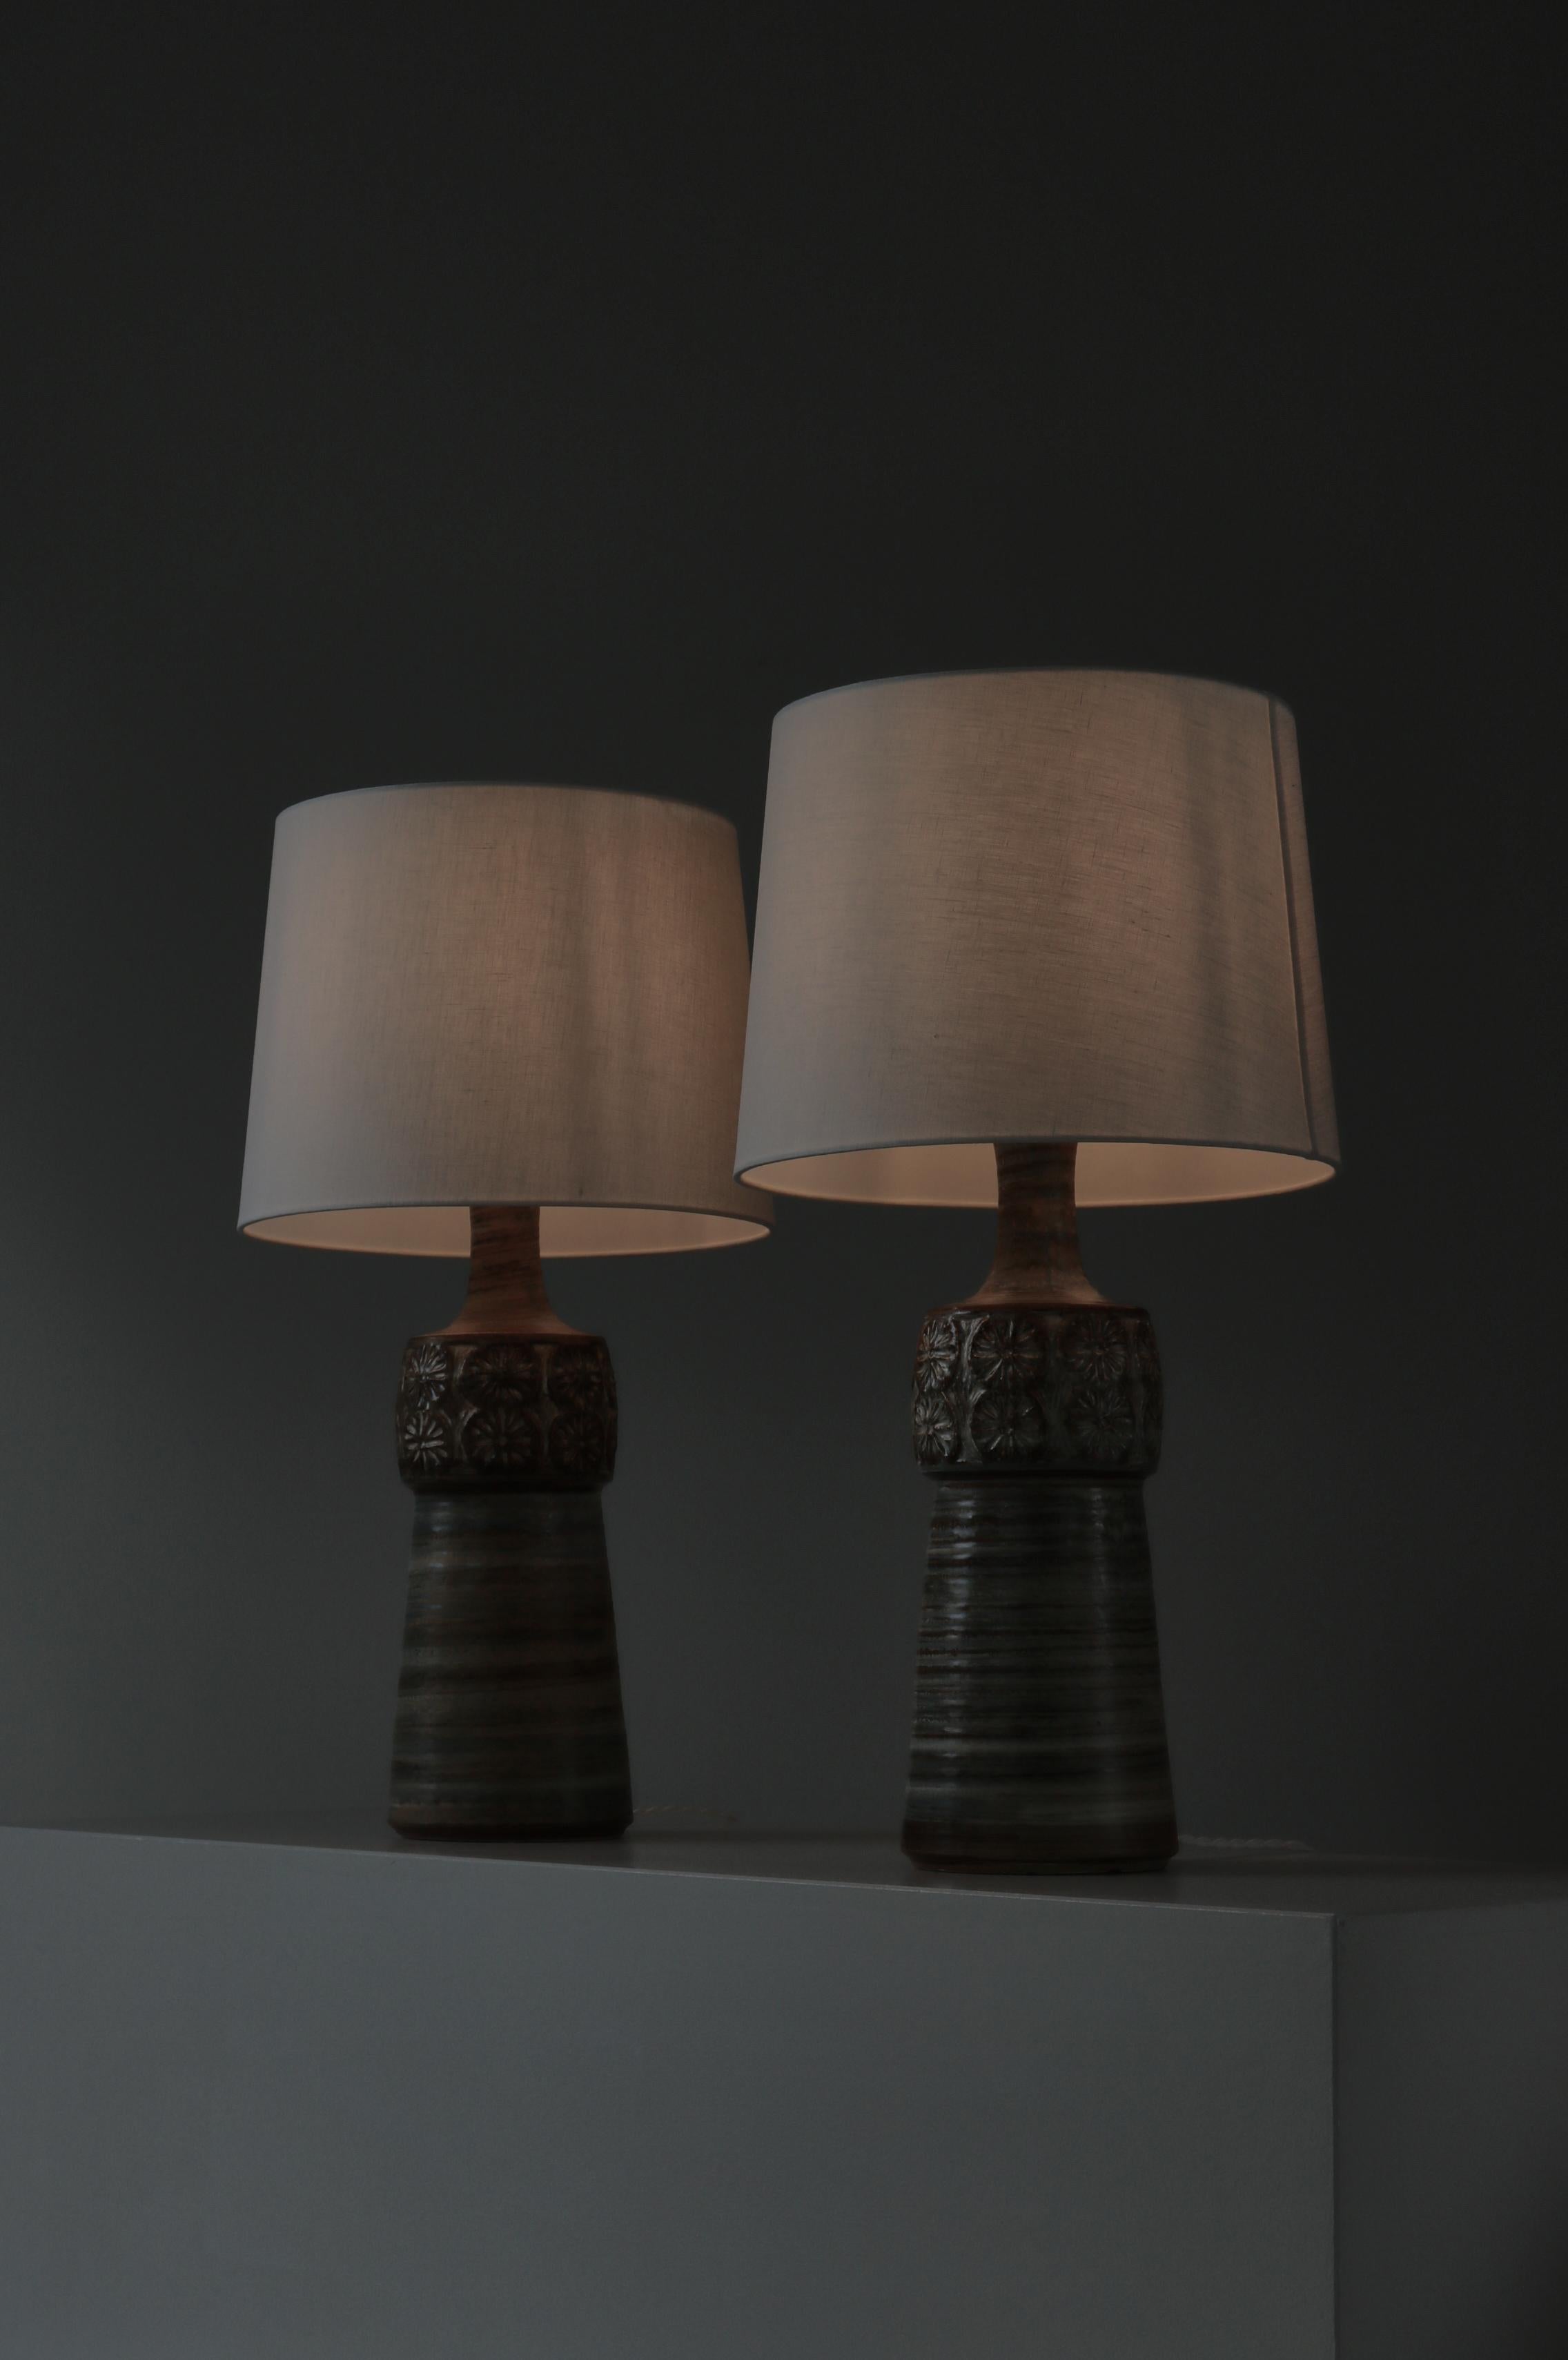 Mid-20th Century Pair of Unique Danish Modern Stoneware Table Lamps by Søholm, Denmark, 1960s For Sale